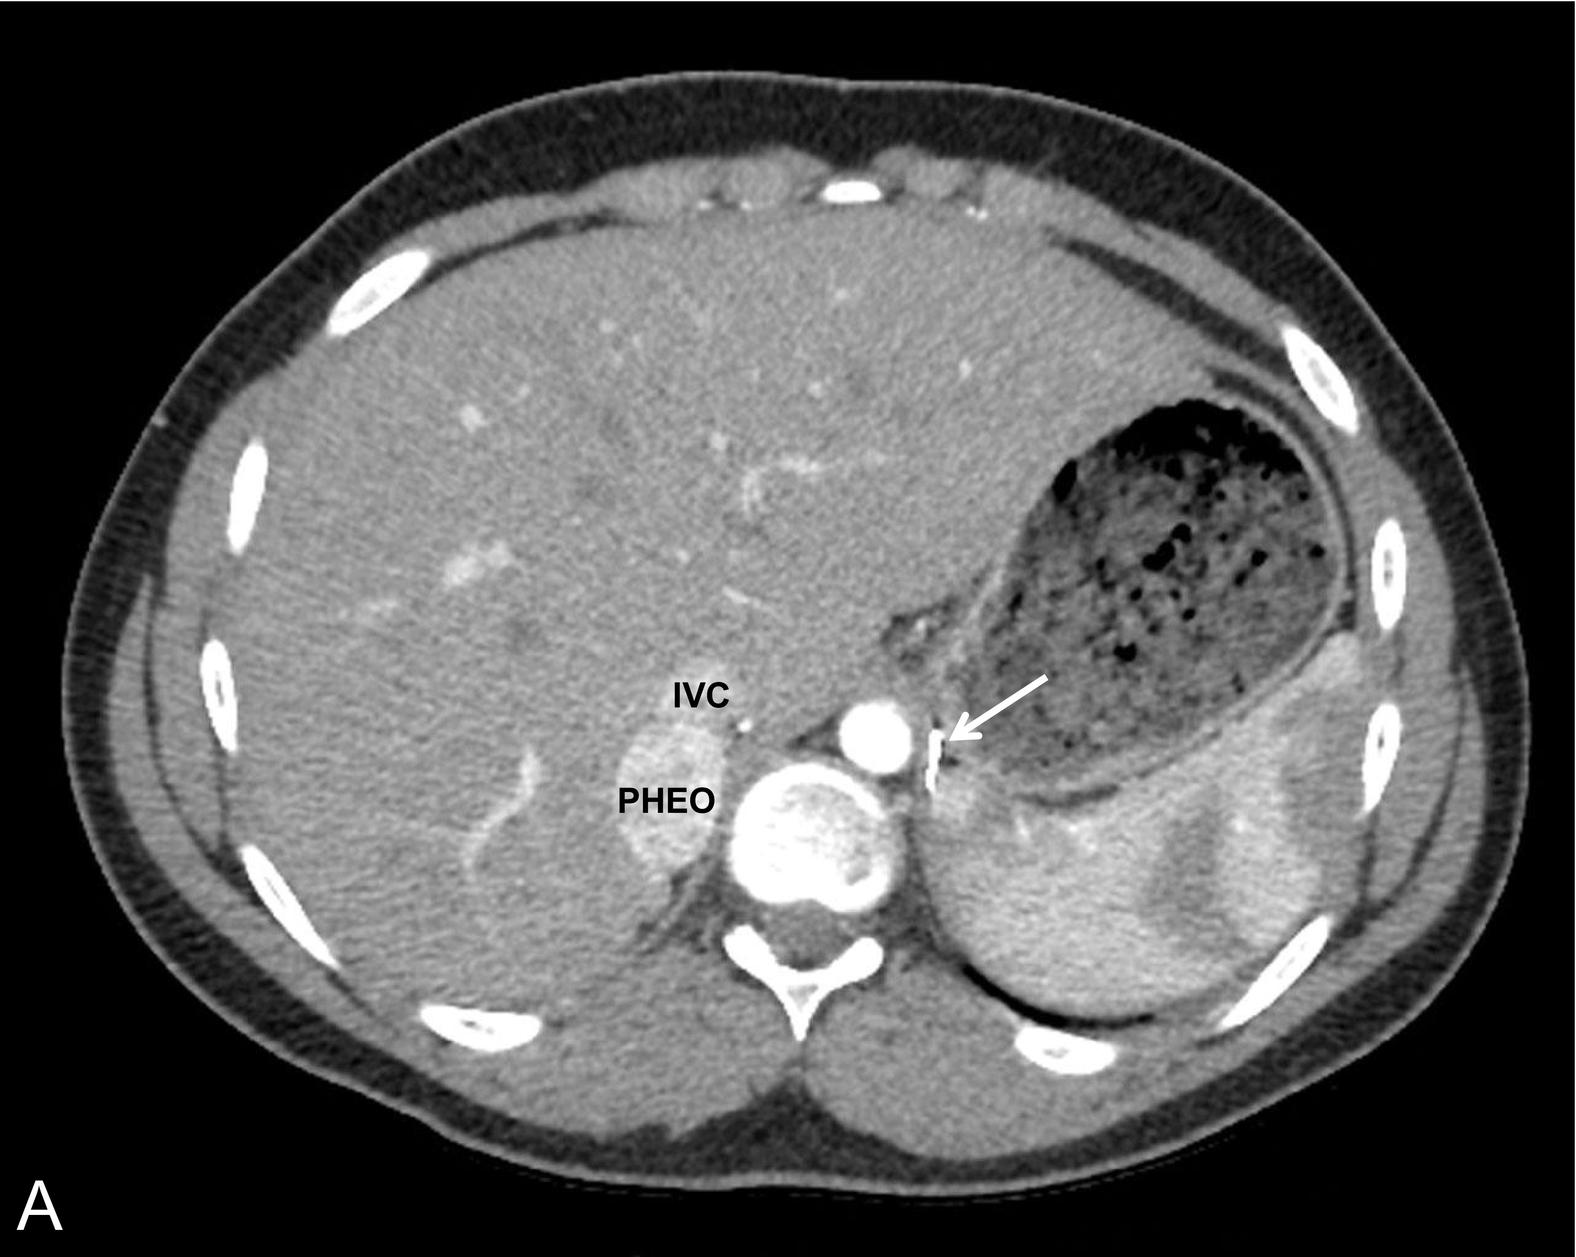 Fig. 15.1, A normotensive 14-year-old male with von Hippel-Lindau disease and a history of a left pheochromocytoma and abdominal paraganglioma diagnosed at the age of 7 years was found to have elevated normetanephrine levels after screening. Axial computed tomography (CT) postcontrast (A) with coronal reconstruction (B) identified a vascular neoplasm arising from the superior right adrenal gland ( arrow , surgical clips from previous adrenalectomy). Metaiodobenzylguanidine (MIBG) scan confirmed the functional nature of the tumor and ruled out other synchronous tumors. Planar (C) and fused single photon emission CT/CT axial images (D) in the same patient, 24 hours after the administration of 123 I MIBG. IVC , Inferior vena cava; PHEO , pheochromocytoma.